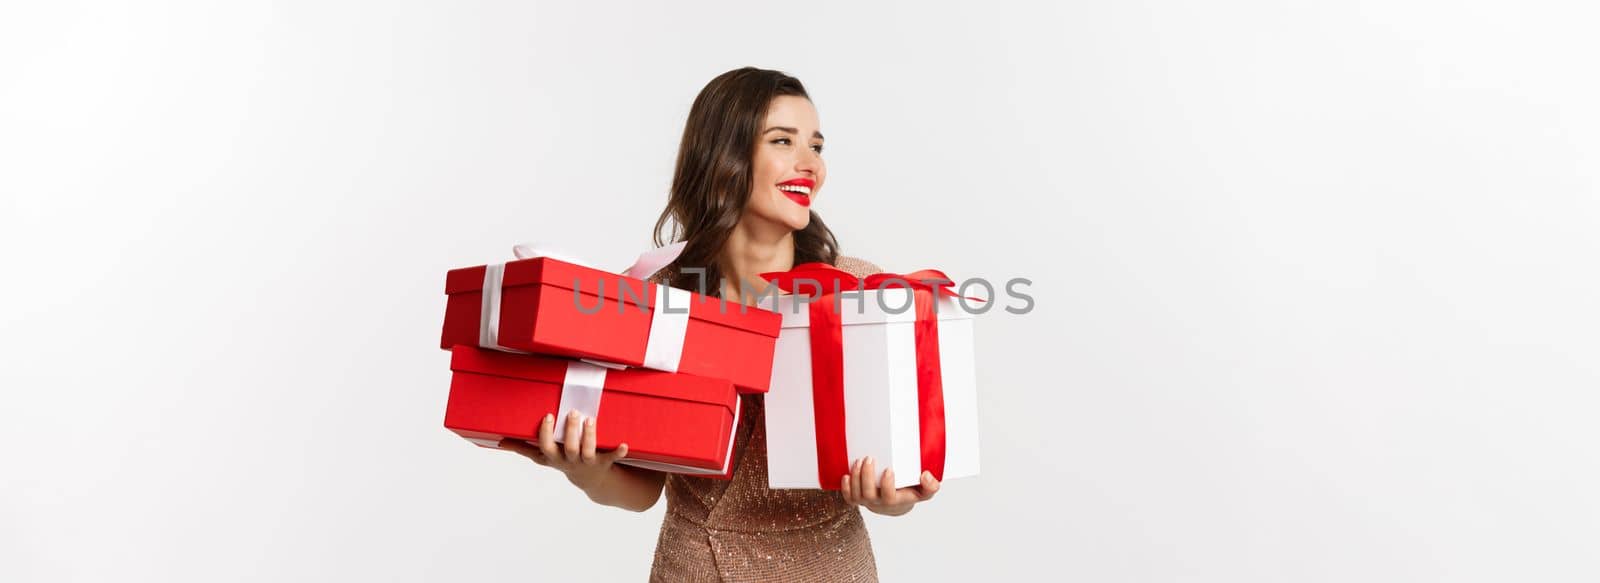 Holidays, celebration concept. Beautiful caucasian woman in elegant dress holding Christmas presents and smiling happy, standing over white background.